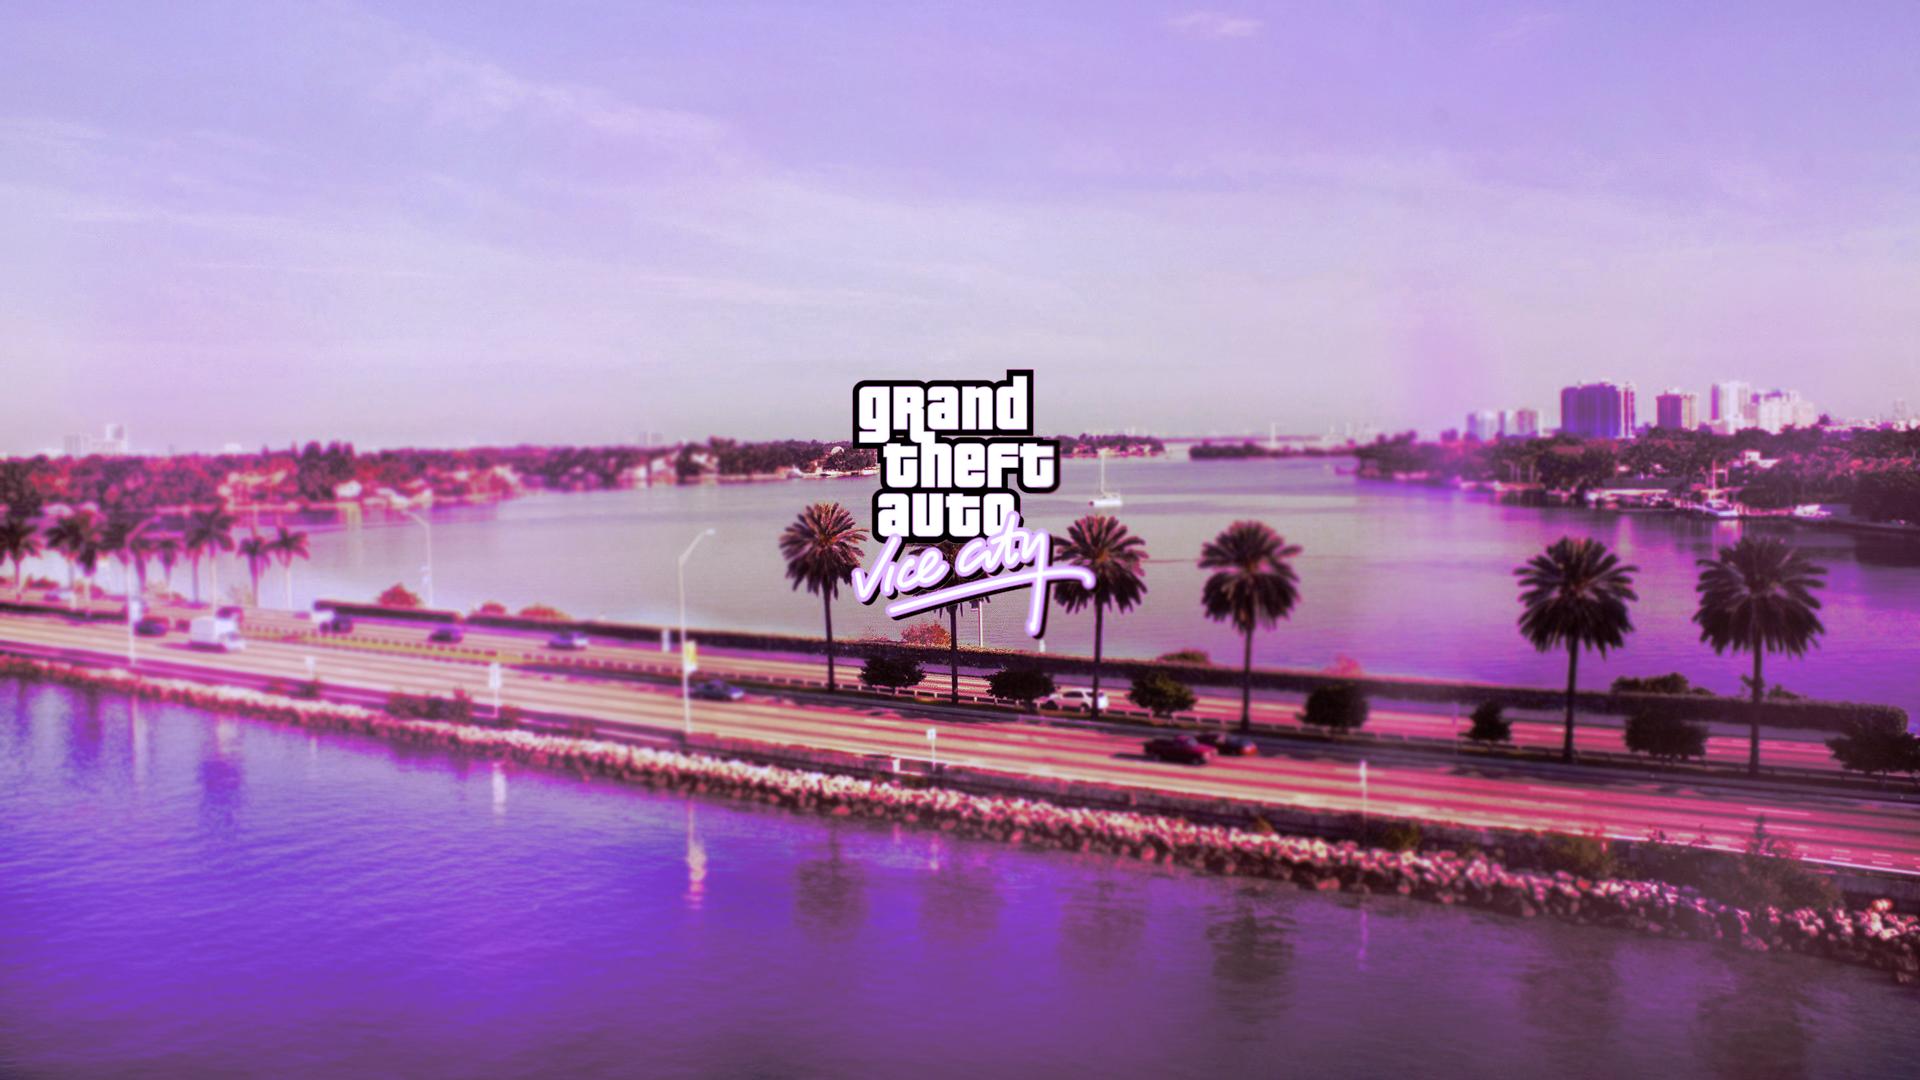 GTA Vice City Wallpaper I made for my friend - Imgur